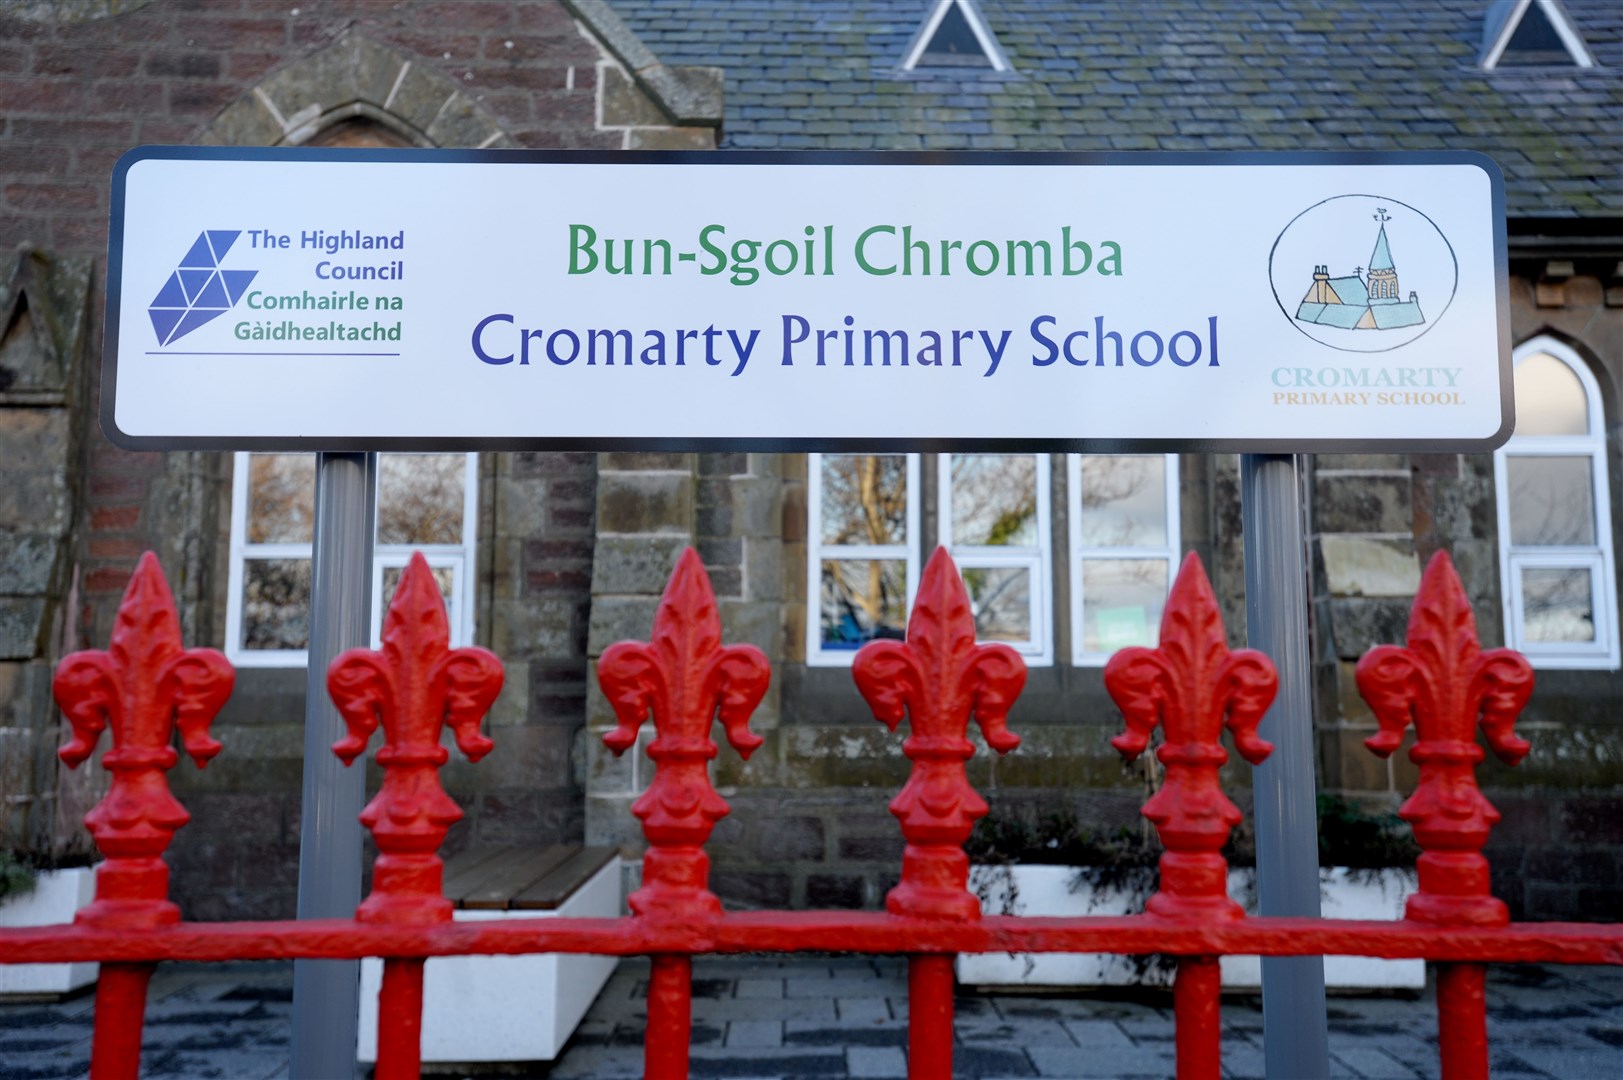 Cromarty Primary School has space for one more child before new arrivals to the town would be bussed elsewhere – despite having capacity for at least 50 more at the revamped school.